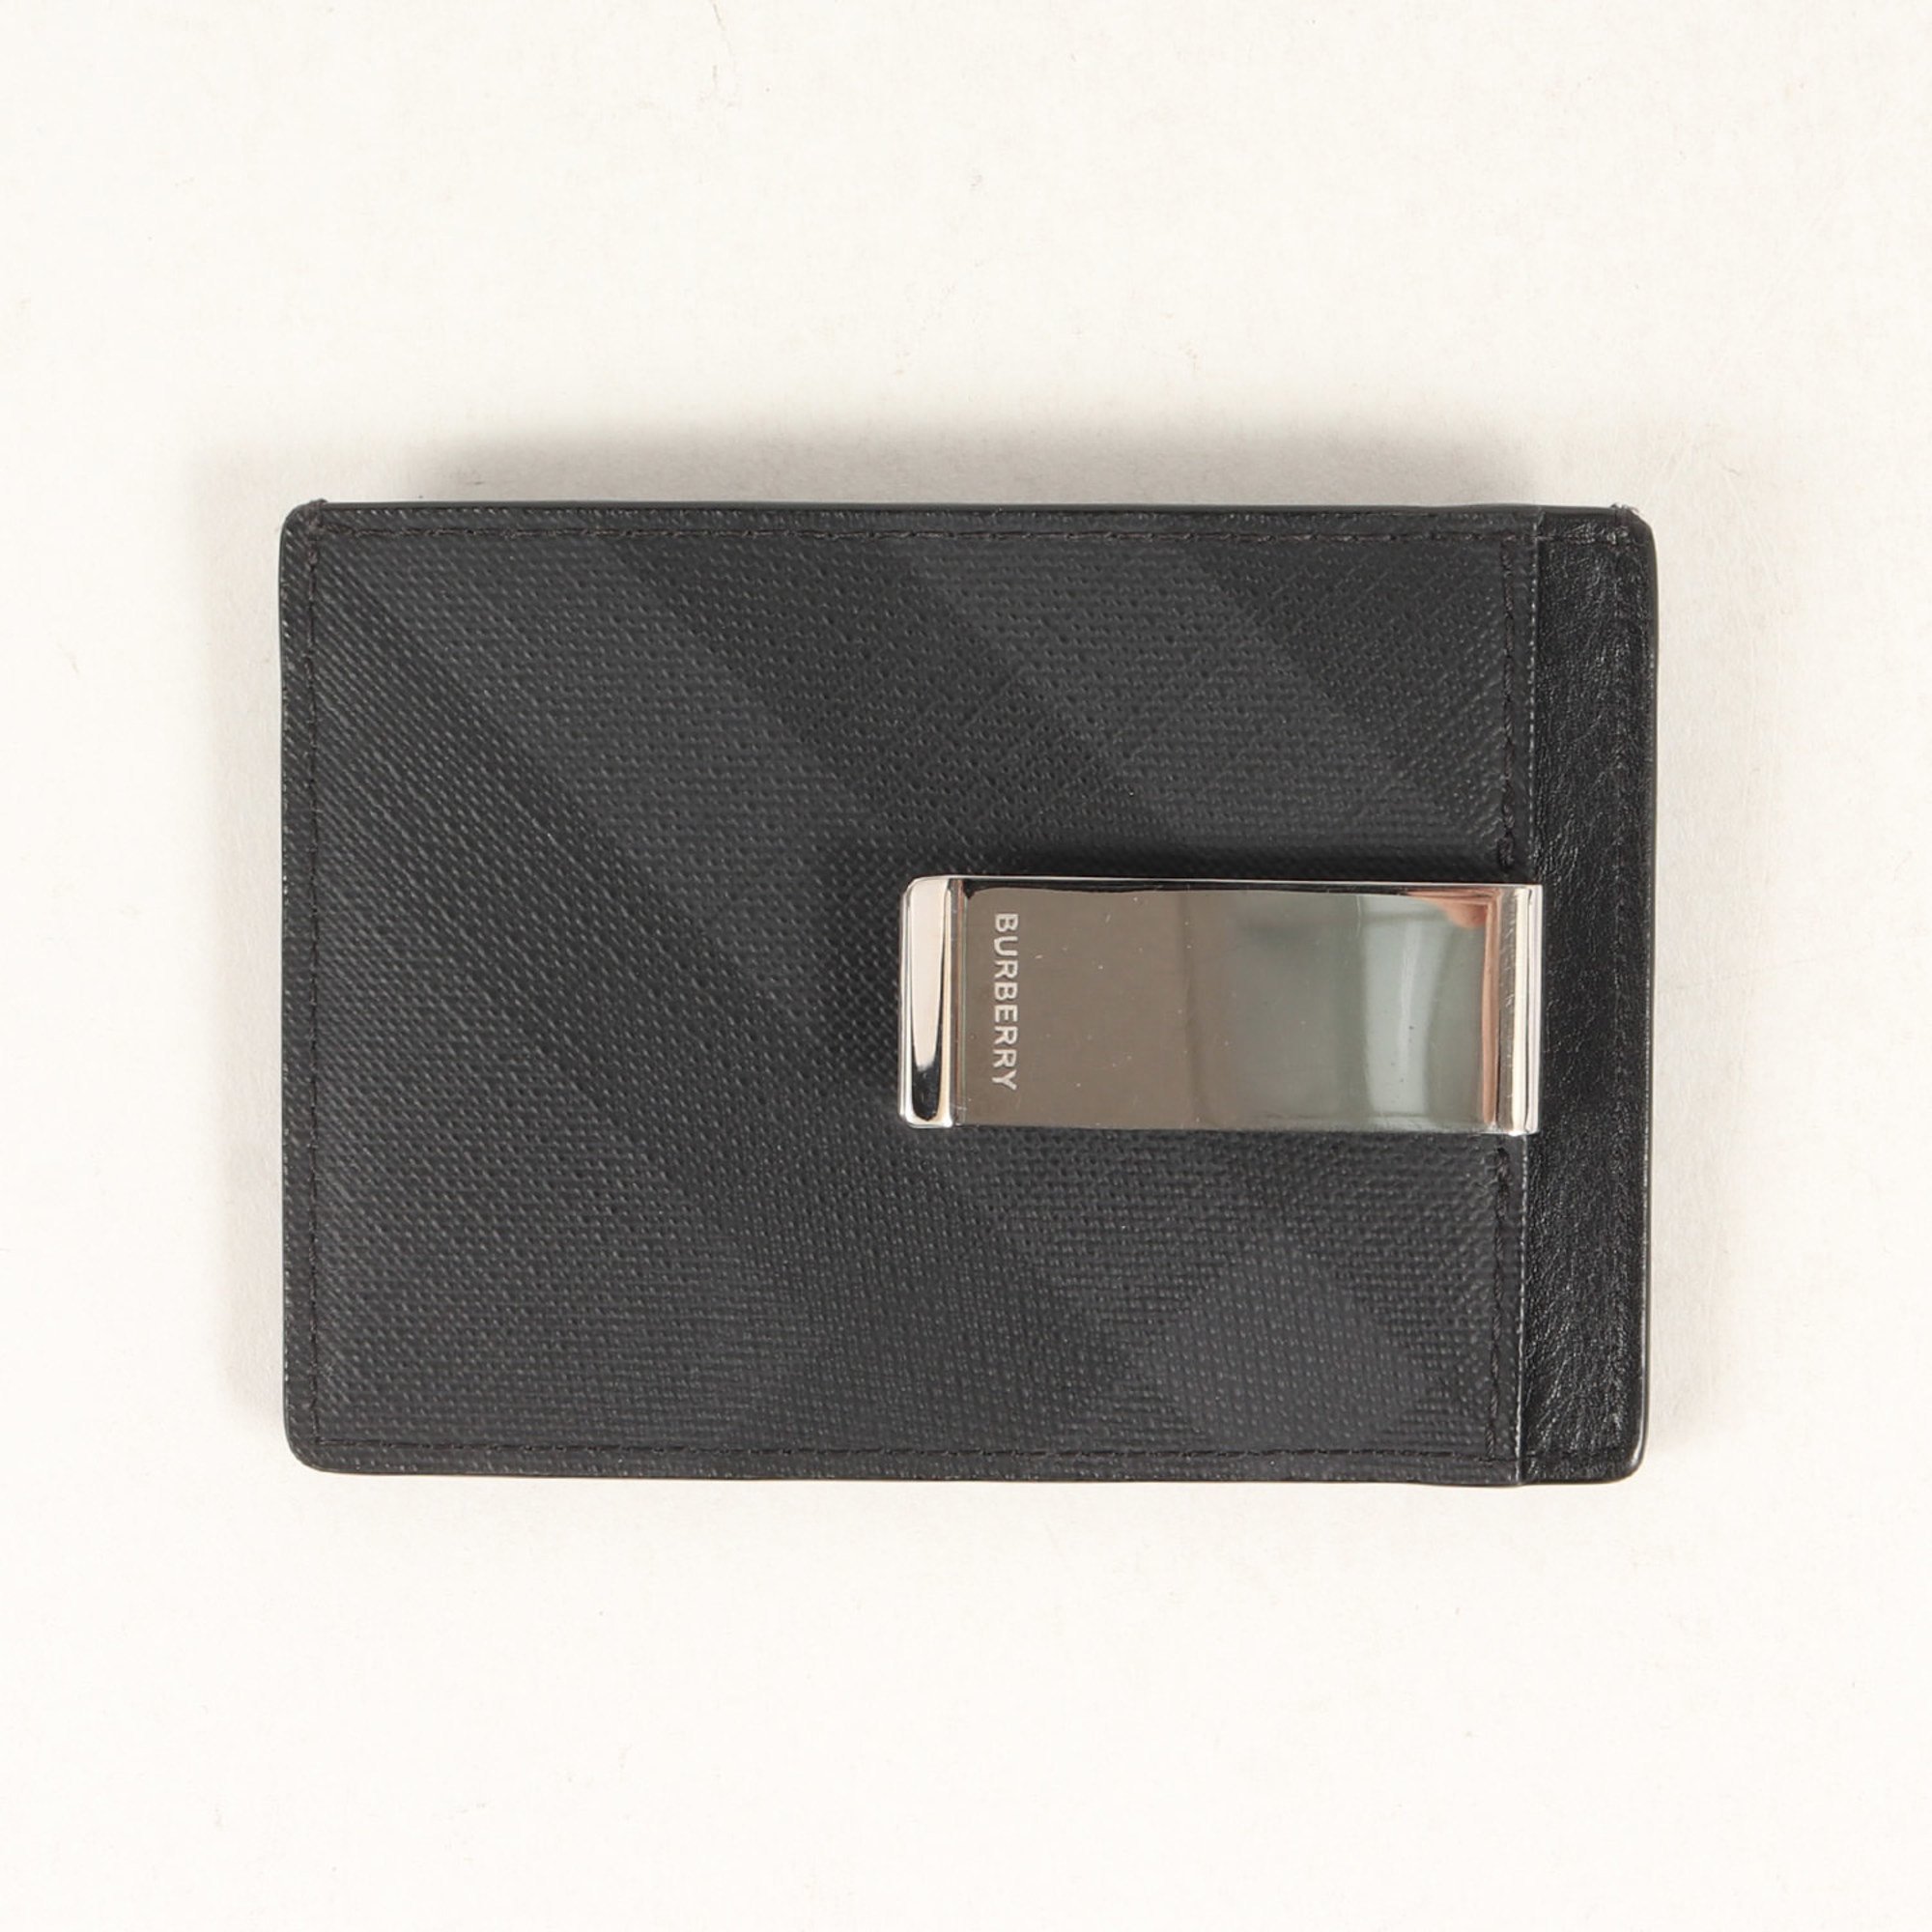 BURBERRY Check leather card case with money clip / business holder pass black